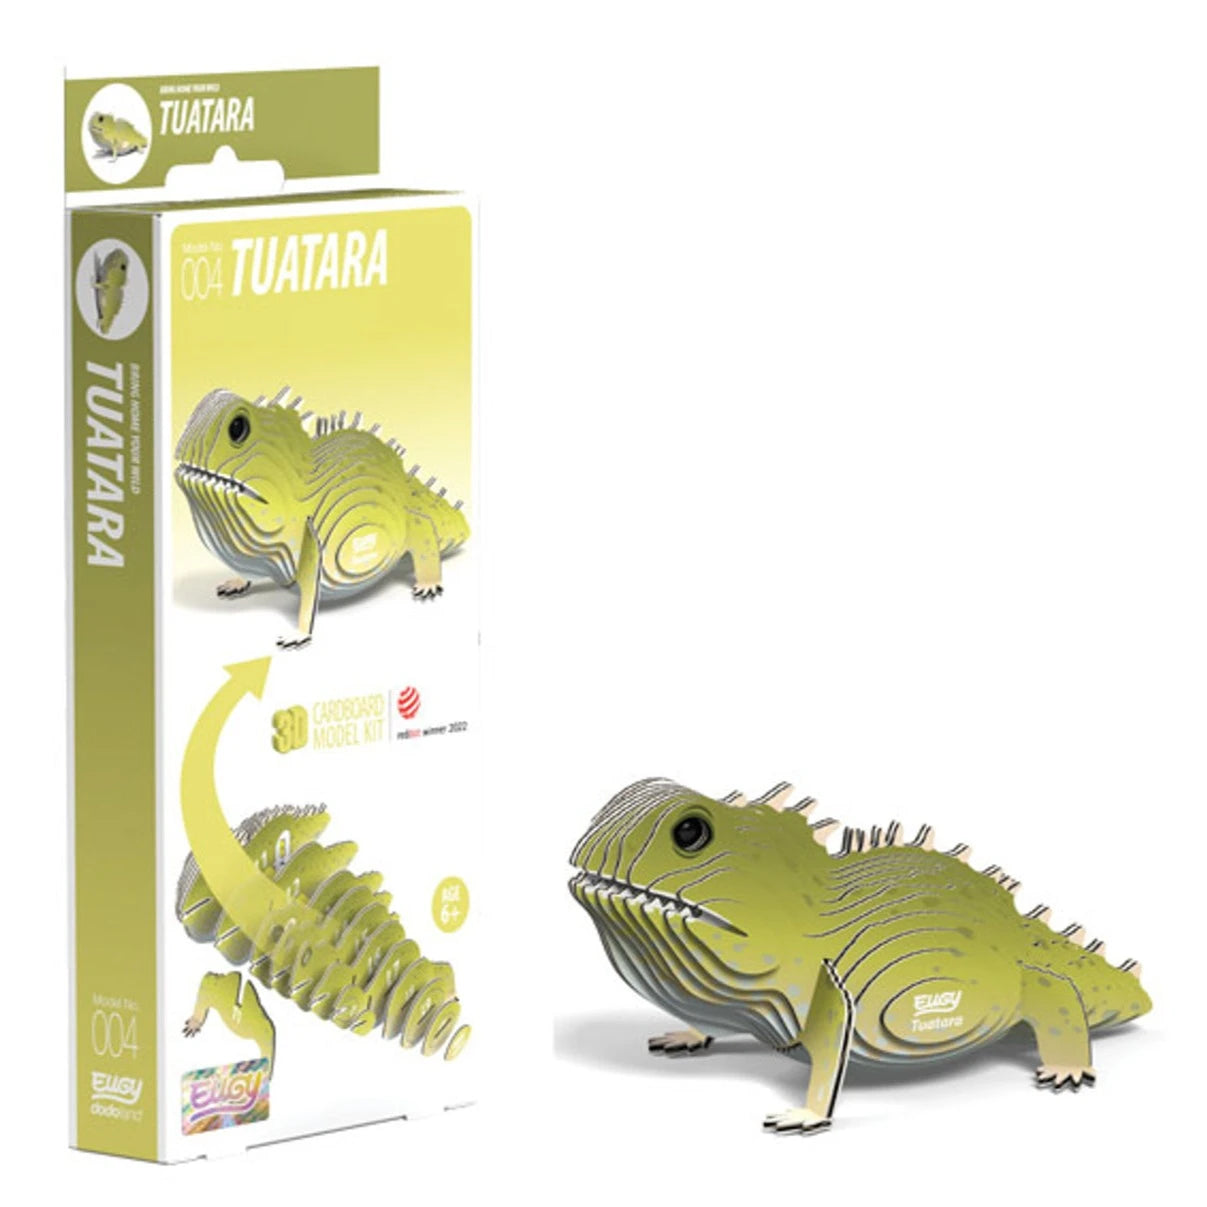 EUGY Tuatara - Any 6 for the price of 5 (Add 6 to Basket) - Loaded Dice